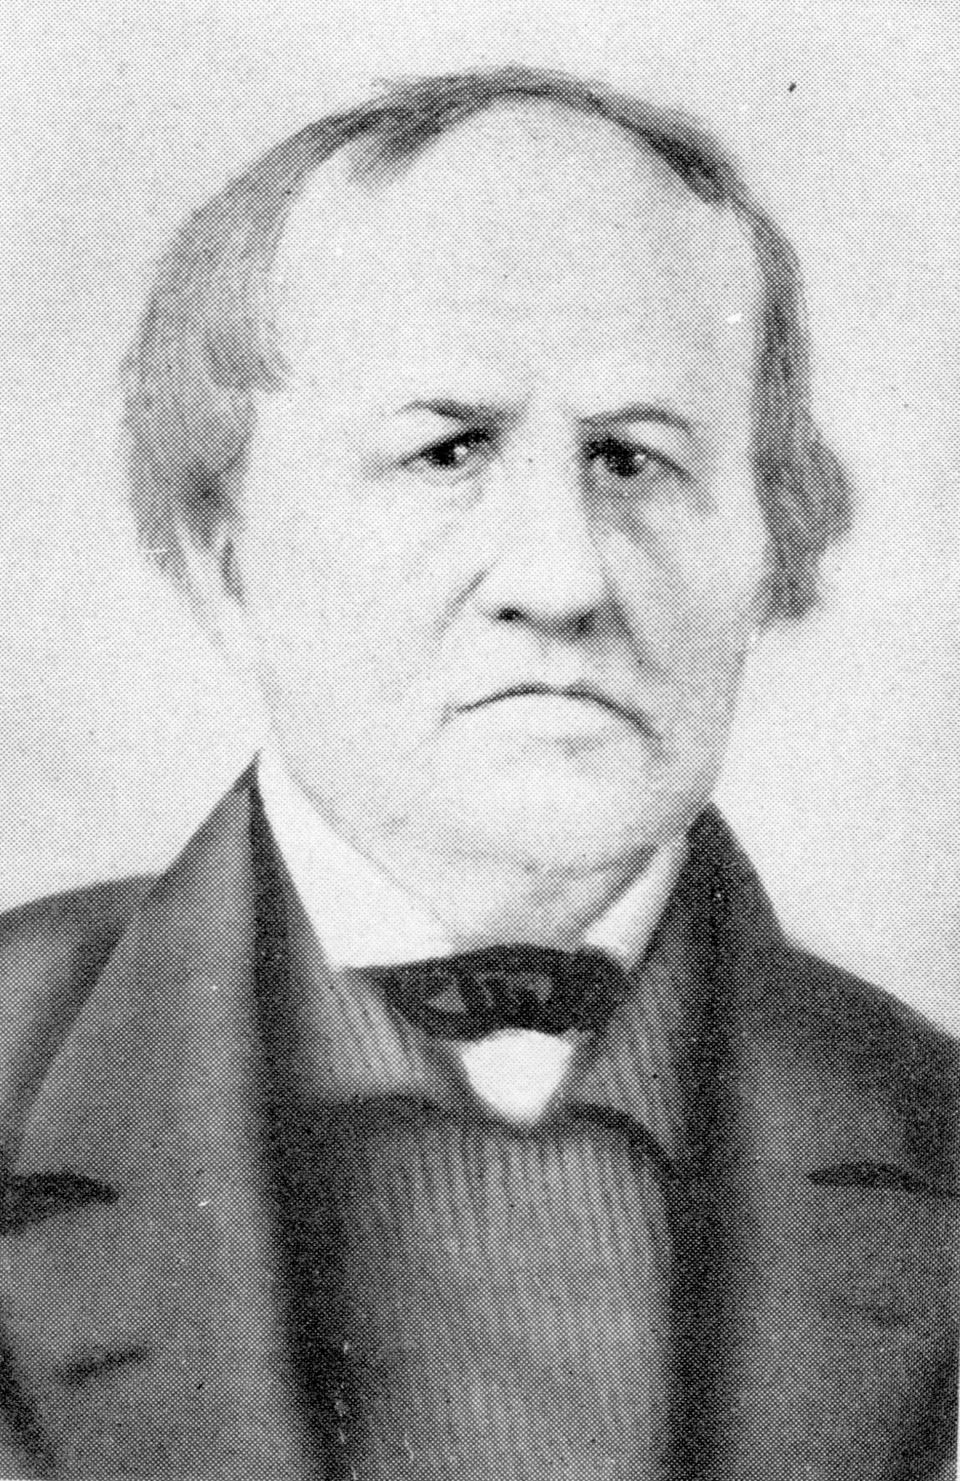 Daniel Leroy, a rival of Joshua Whitney and another developer in the early 1800s.